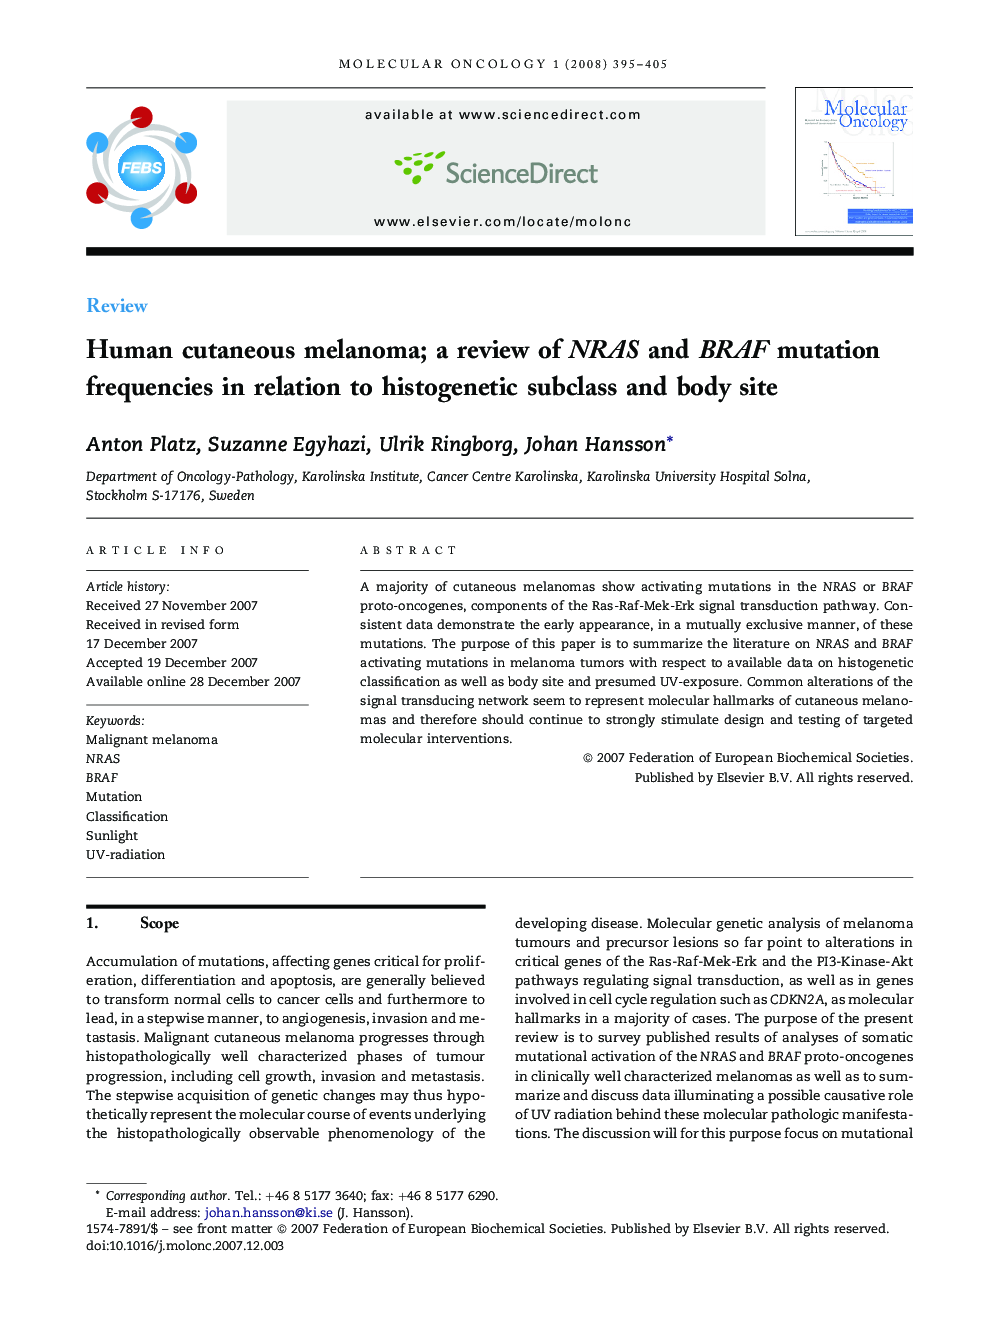 Human cutaneous melanoma; a review of NRAS and BRAF mutation frequencies in relation to histogenetic subclass and body site